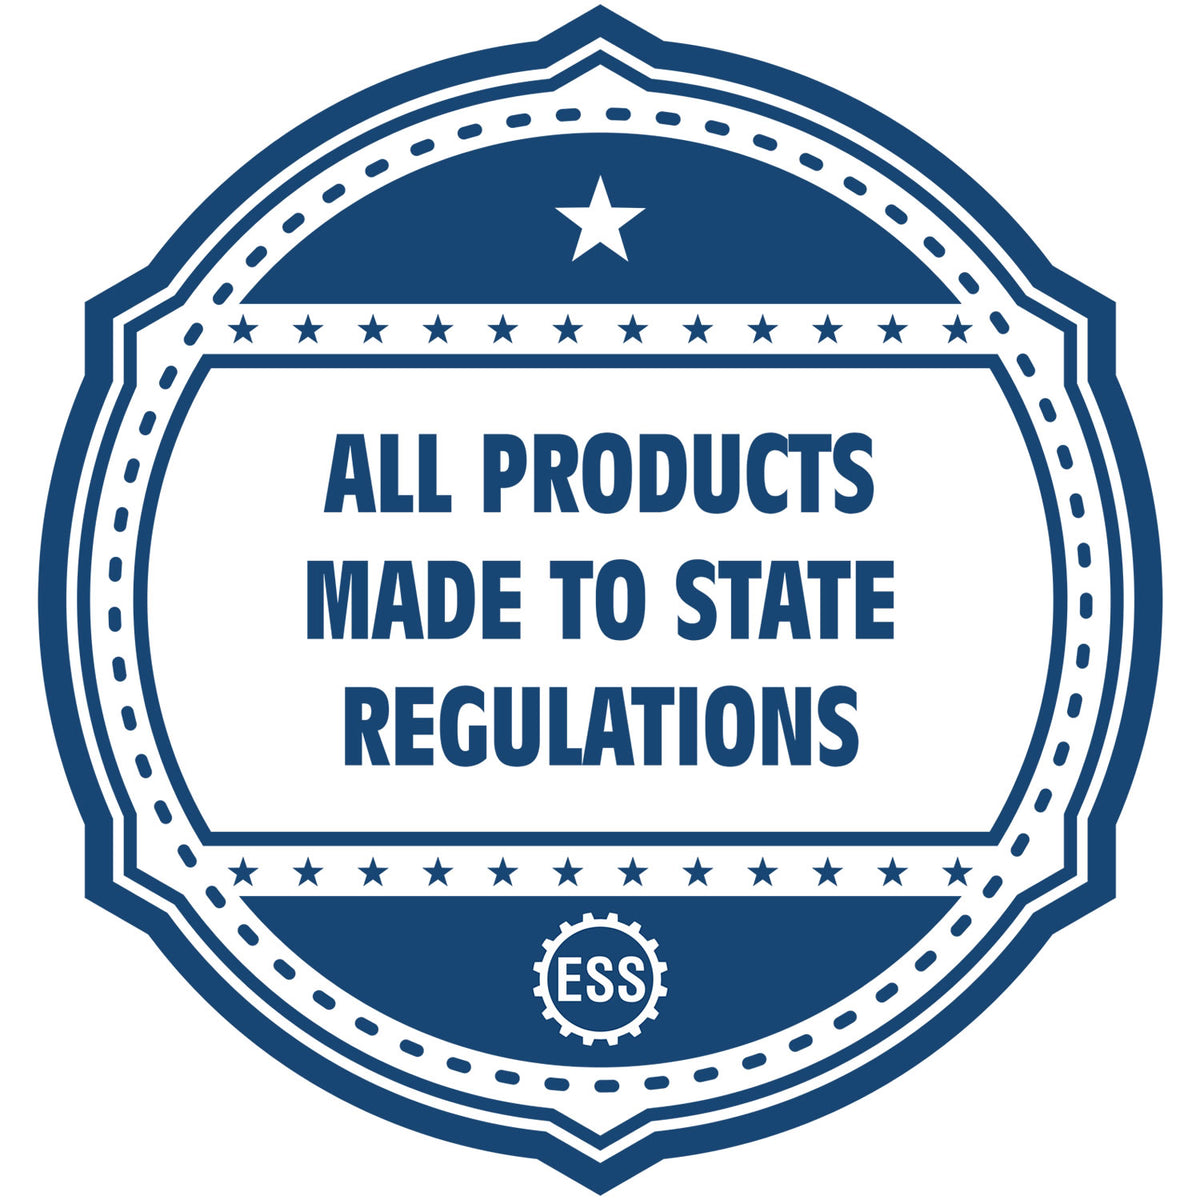 An icon or badge element for the Long Reach Kentucky Land Surveyor Seal showing that this product is made in compliance with state regulations.